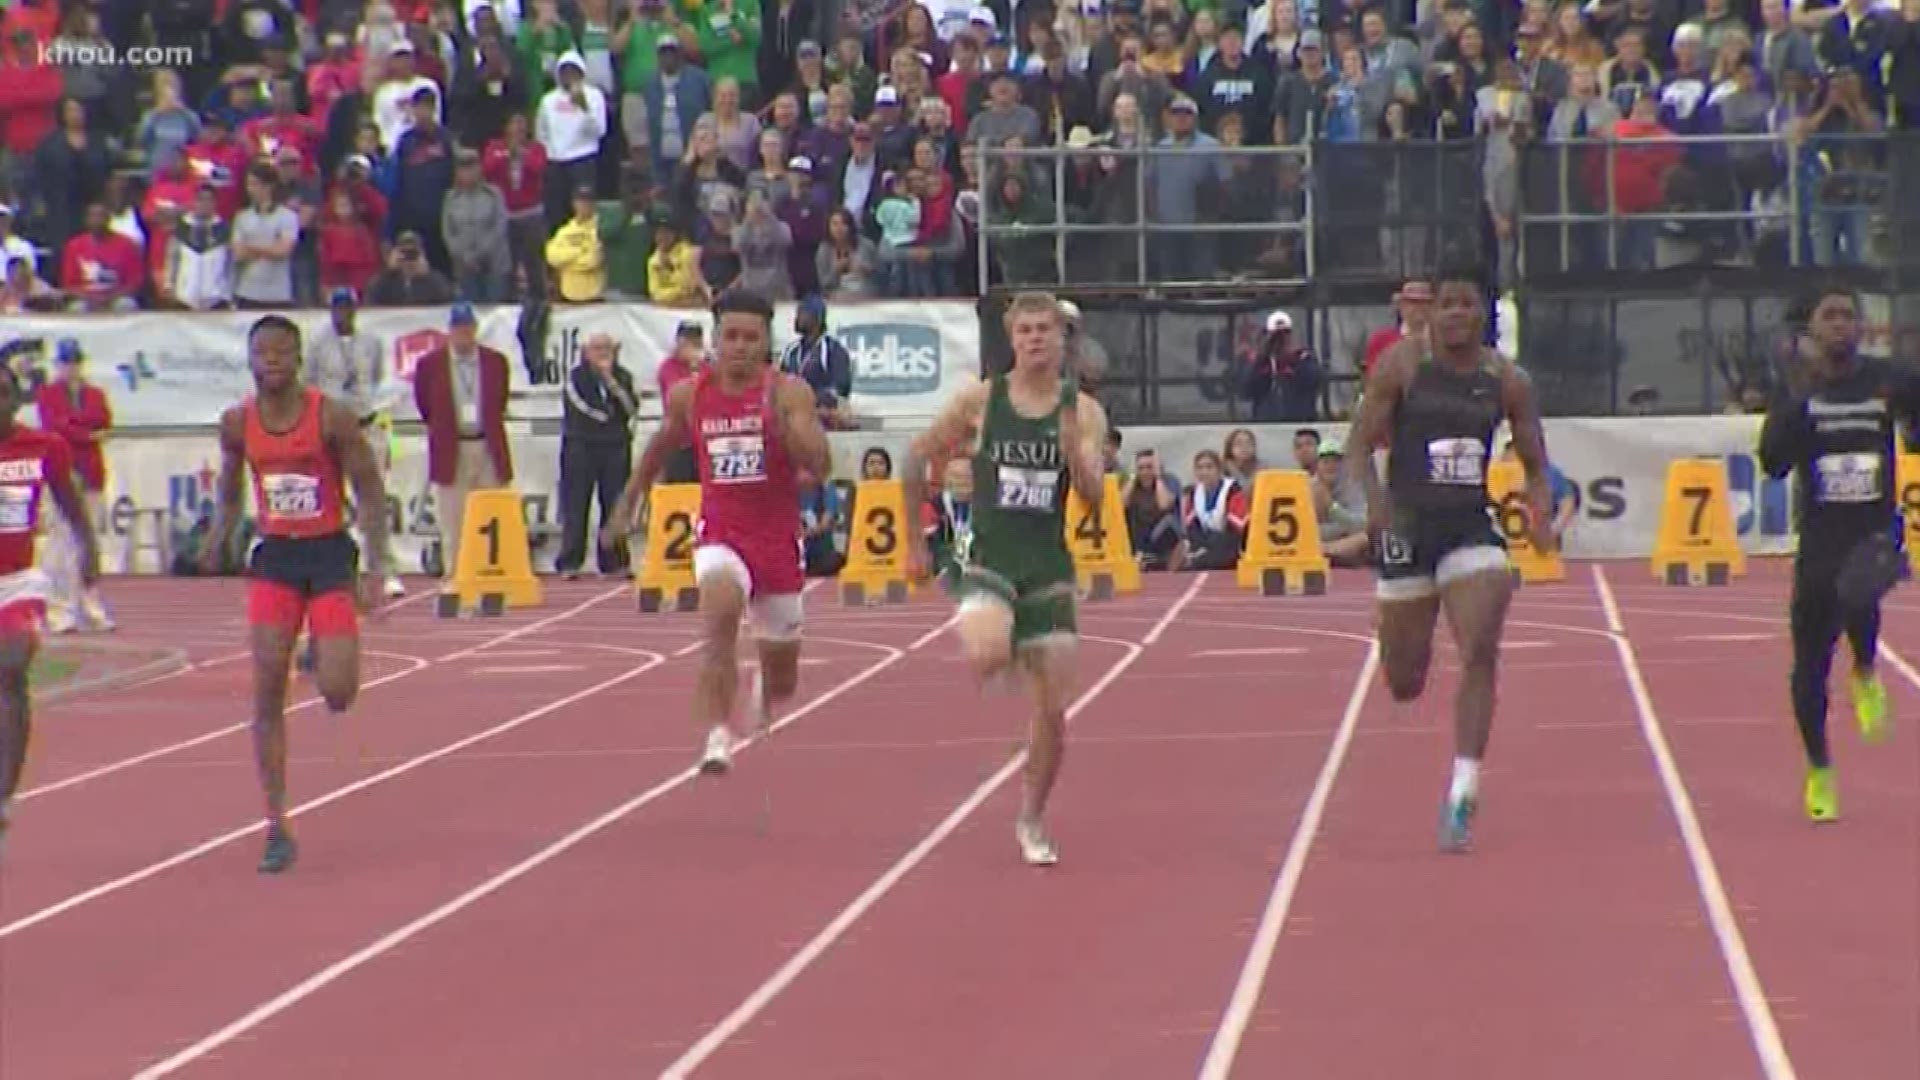 We already knew Strake Jesuit sprinter Matthew Boling was fast. On Saturday, he took it up a notch.